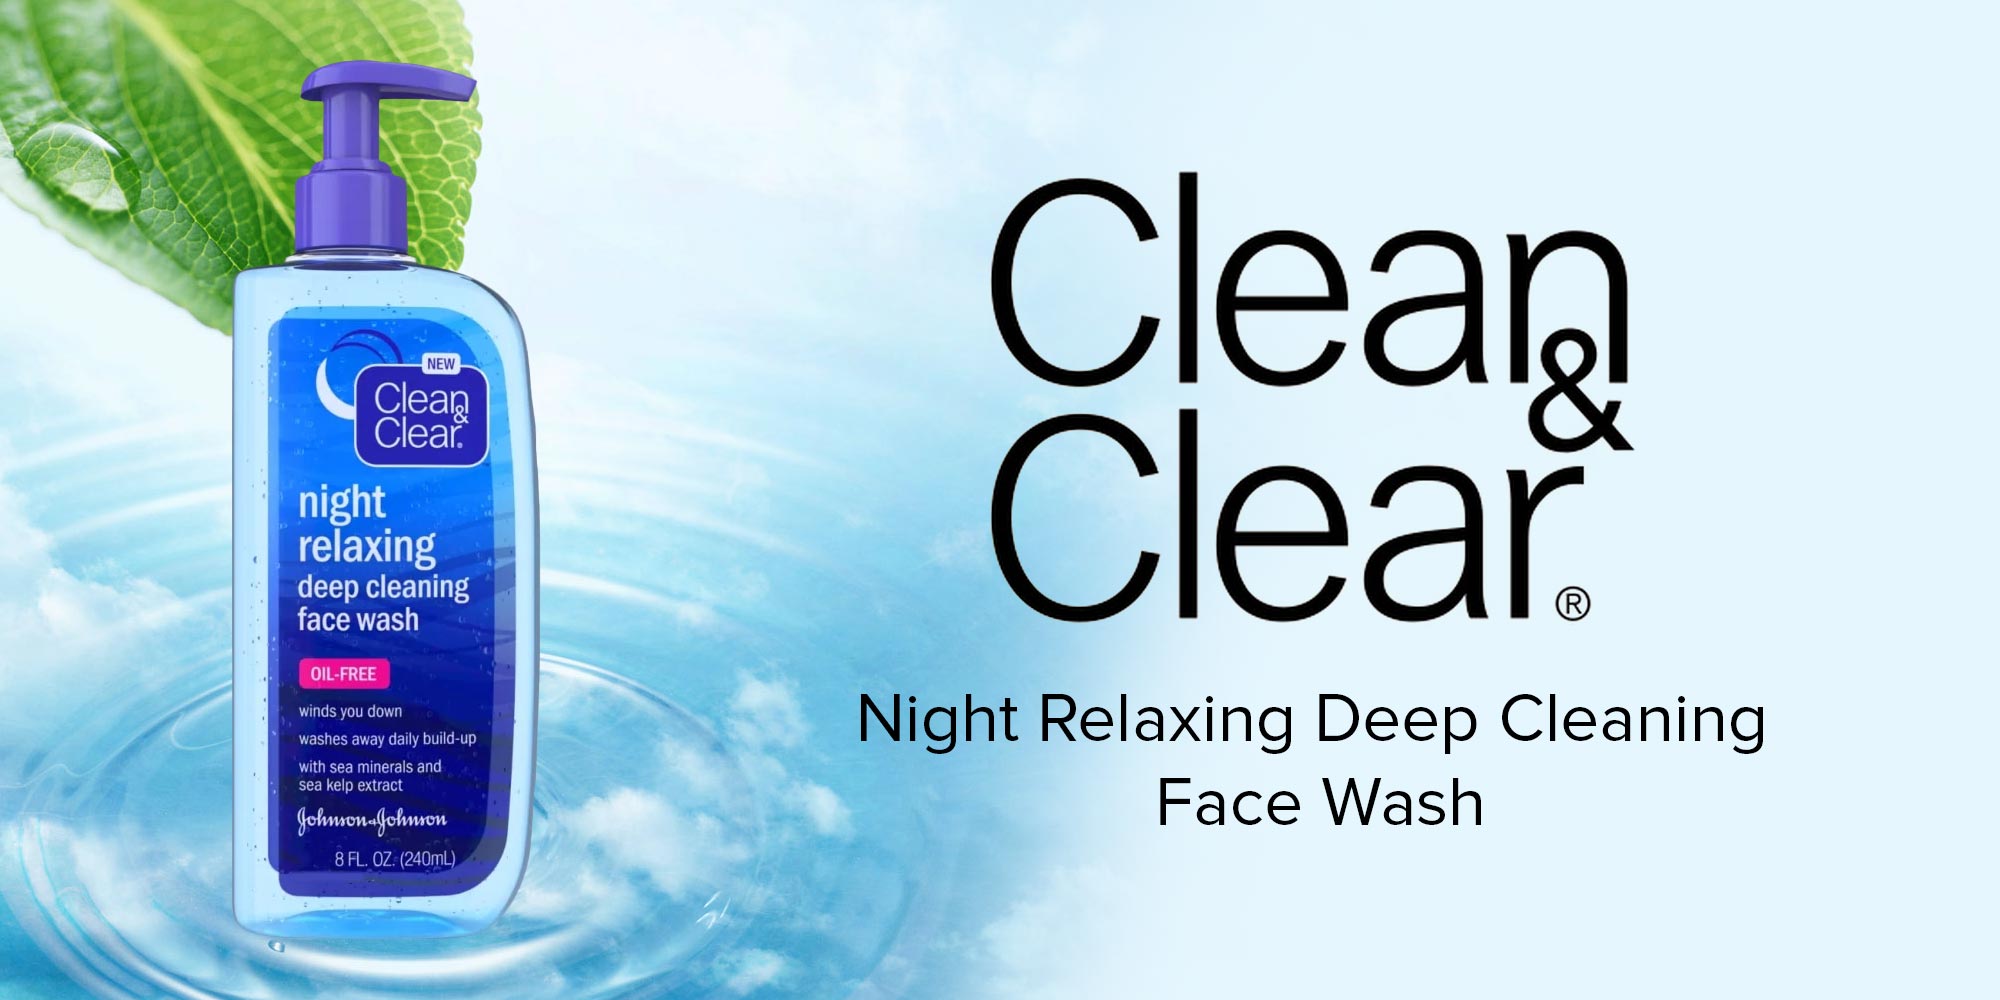 NIGHT RELAXING® Deep Cleaning Face Wash